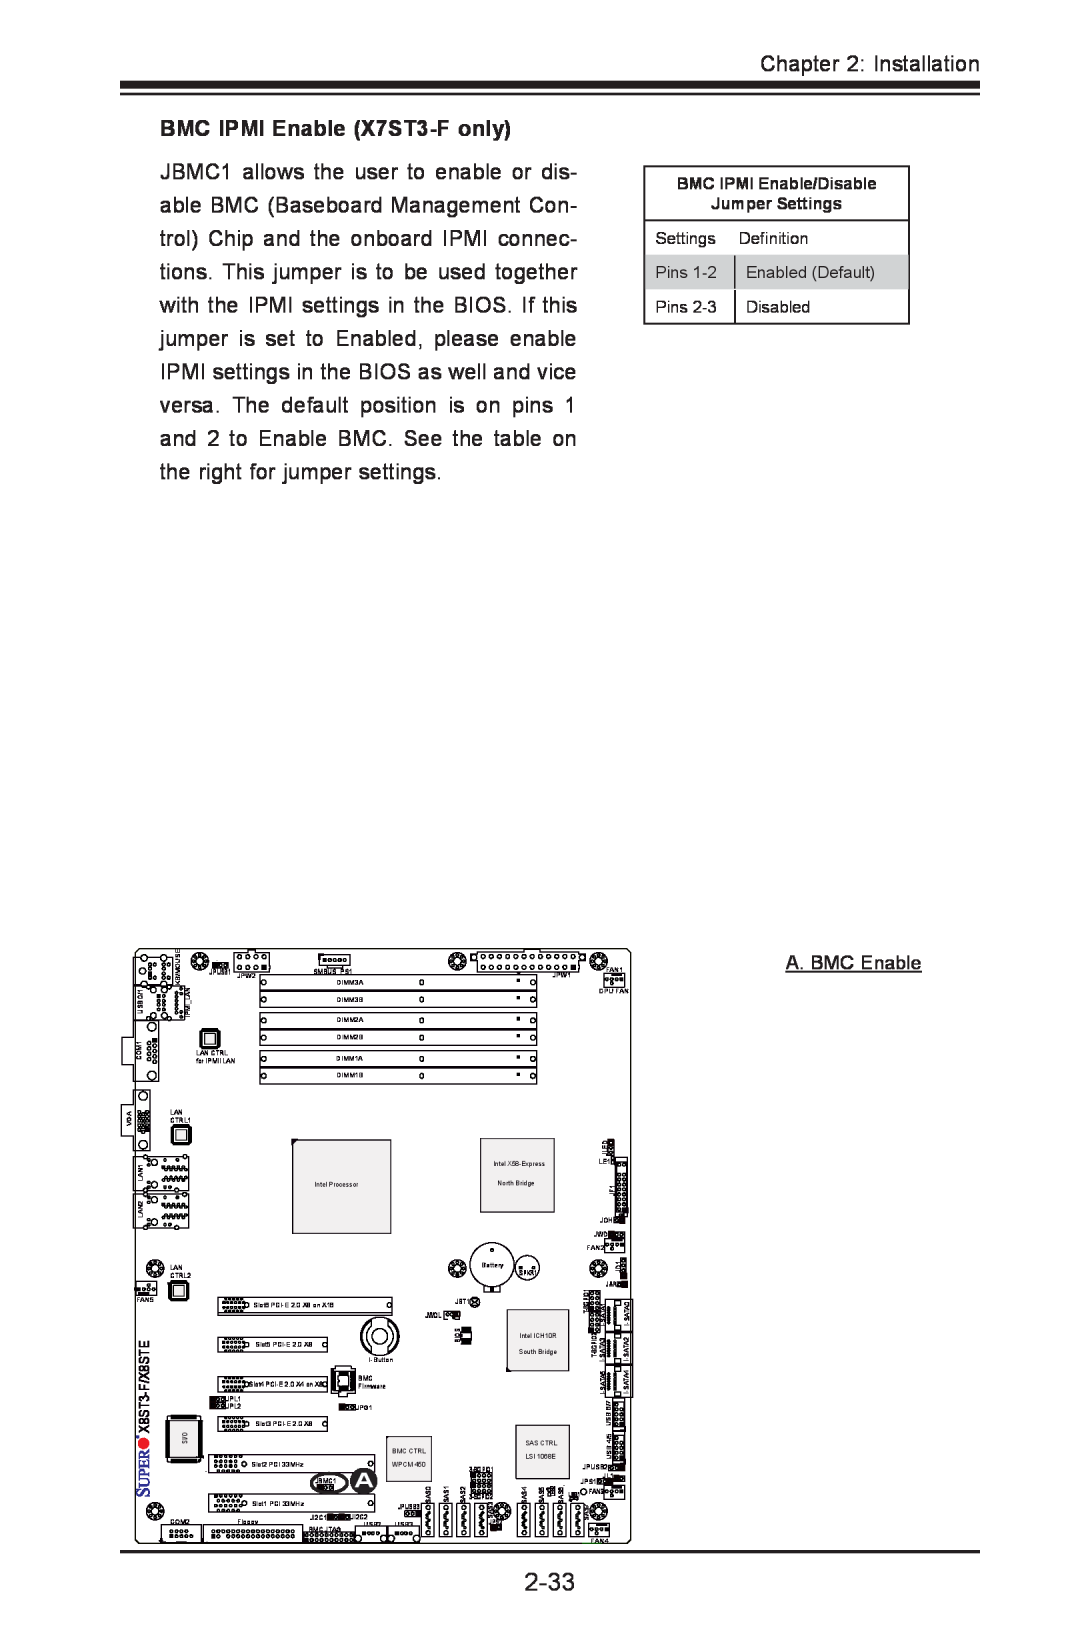 SUPER MICRO Computer X8STE, X8ST3-F user manual 2-33, BMC IPMI Enable X7ST3-F only, A. BMC Enable 